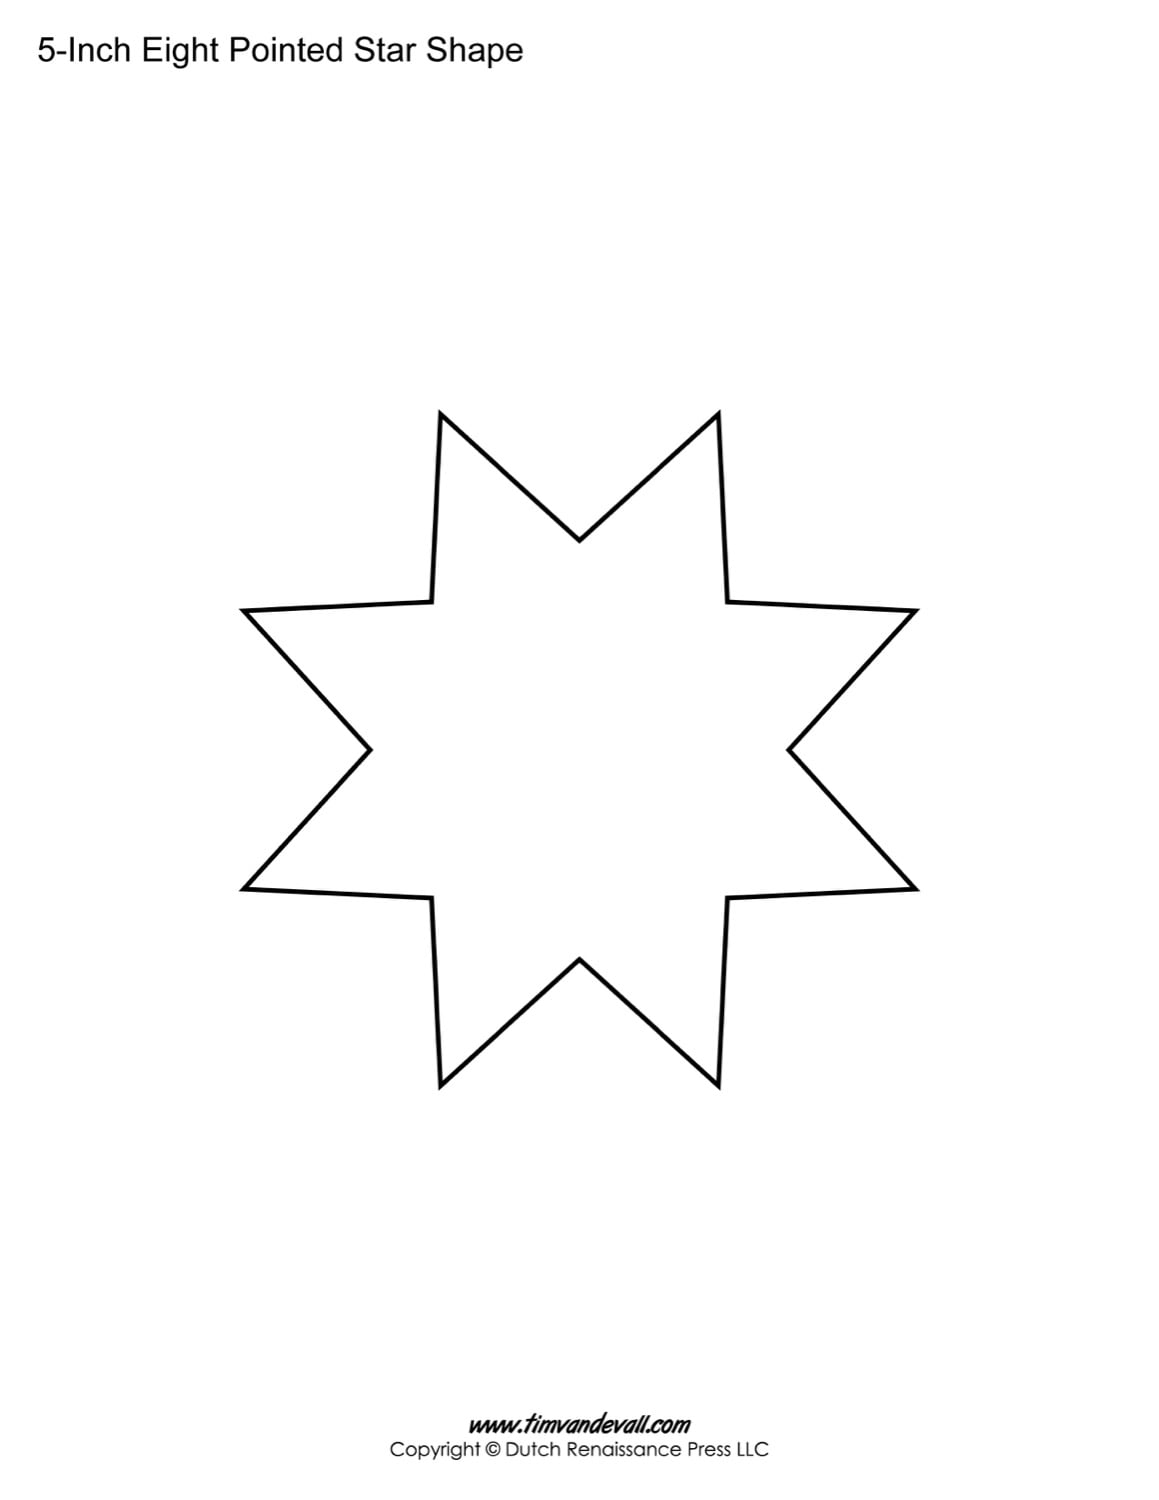 Free Eight Pointed Star Shapes Blank Printable Shapes For Kids